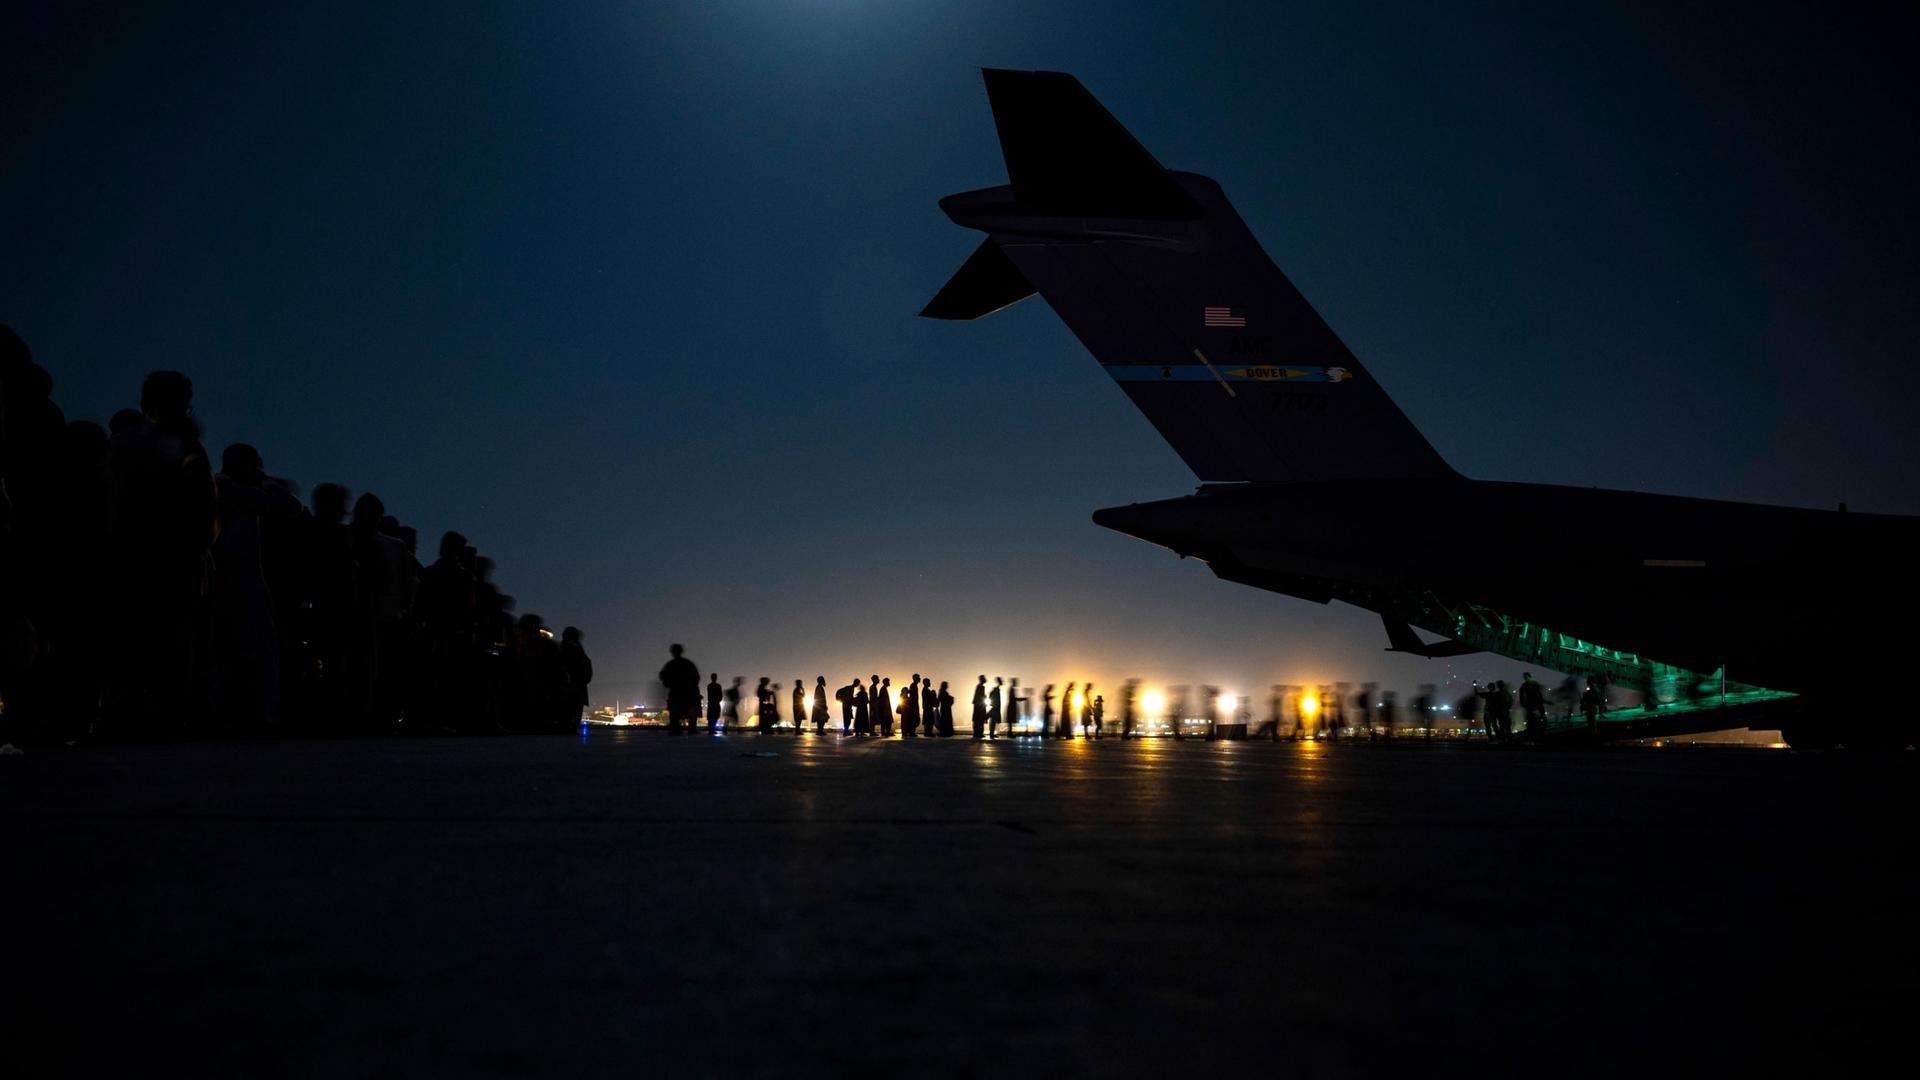 A line of people are shown in the distance in low light with the tail of a large aircraft as the sun sets.